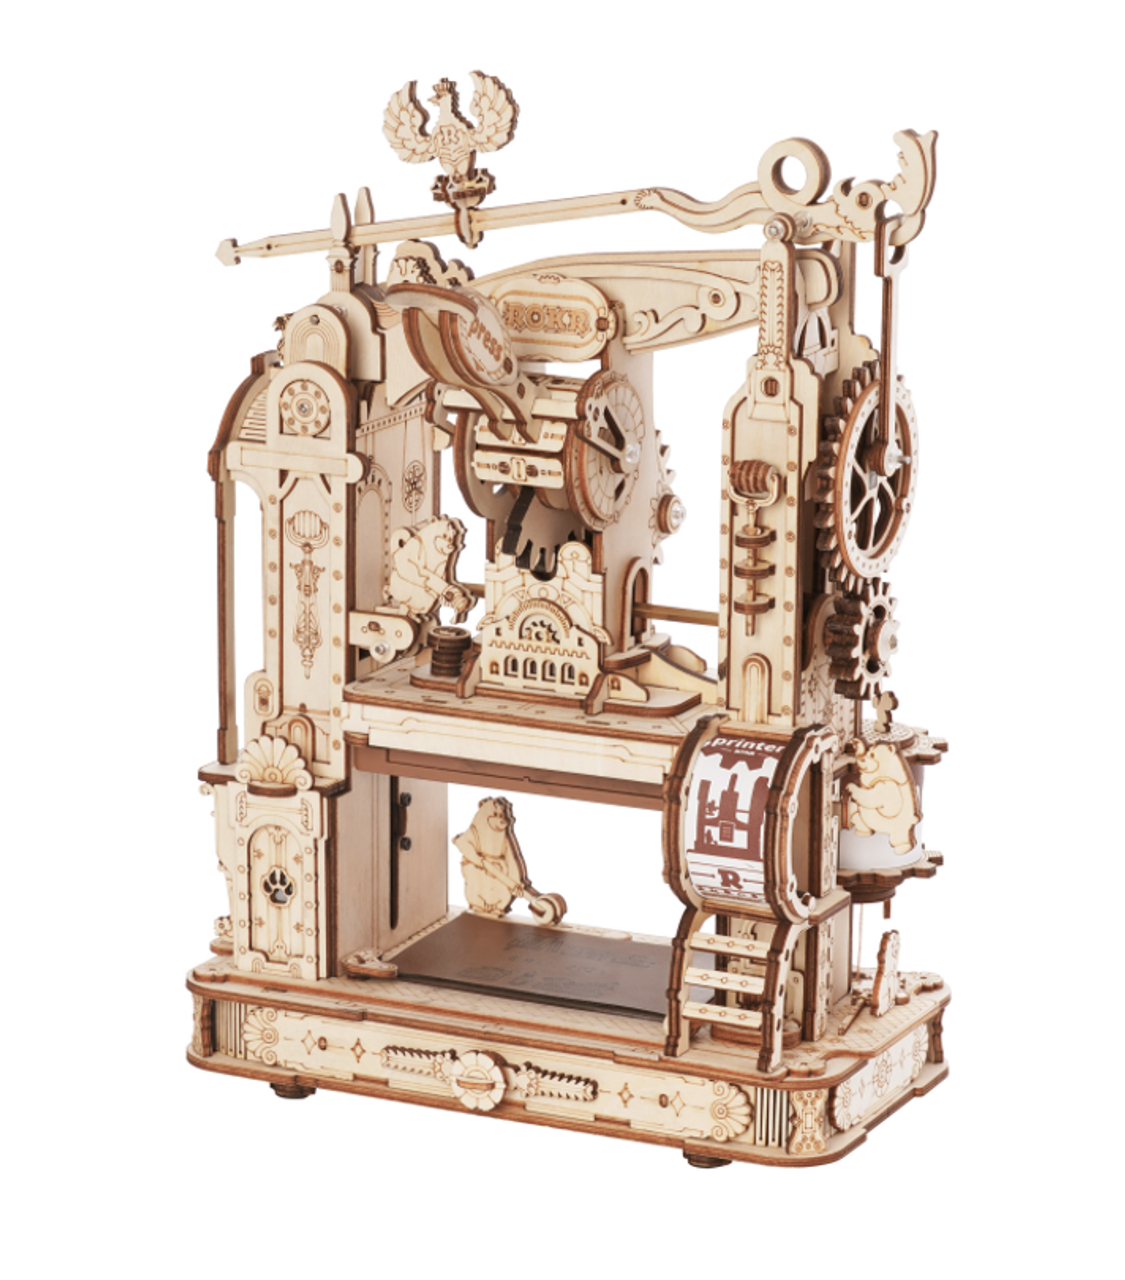 ROKR - Classic Printing Press - DIY Mechanical Working 3D Wooden Puzzle Kit (LK602)